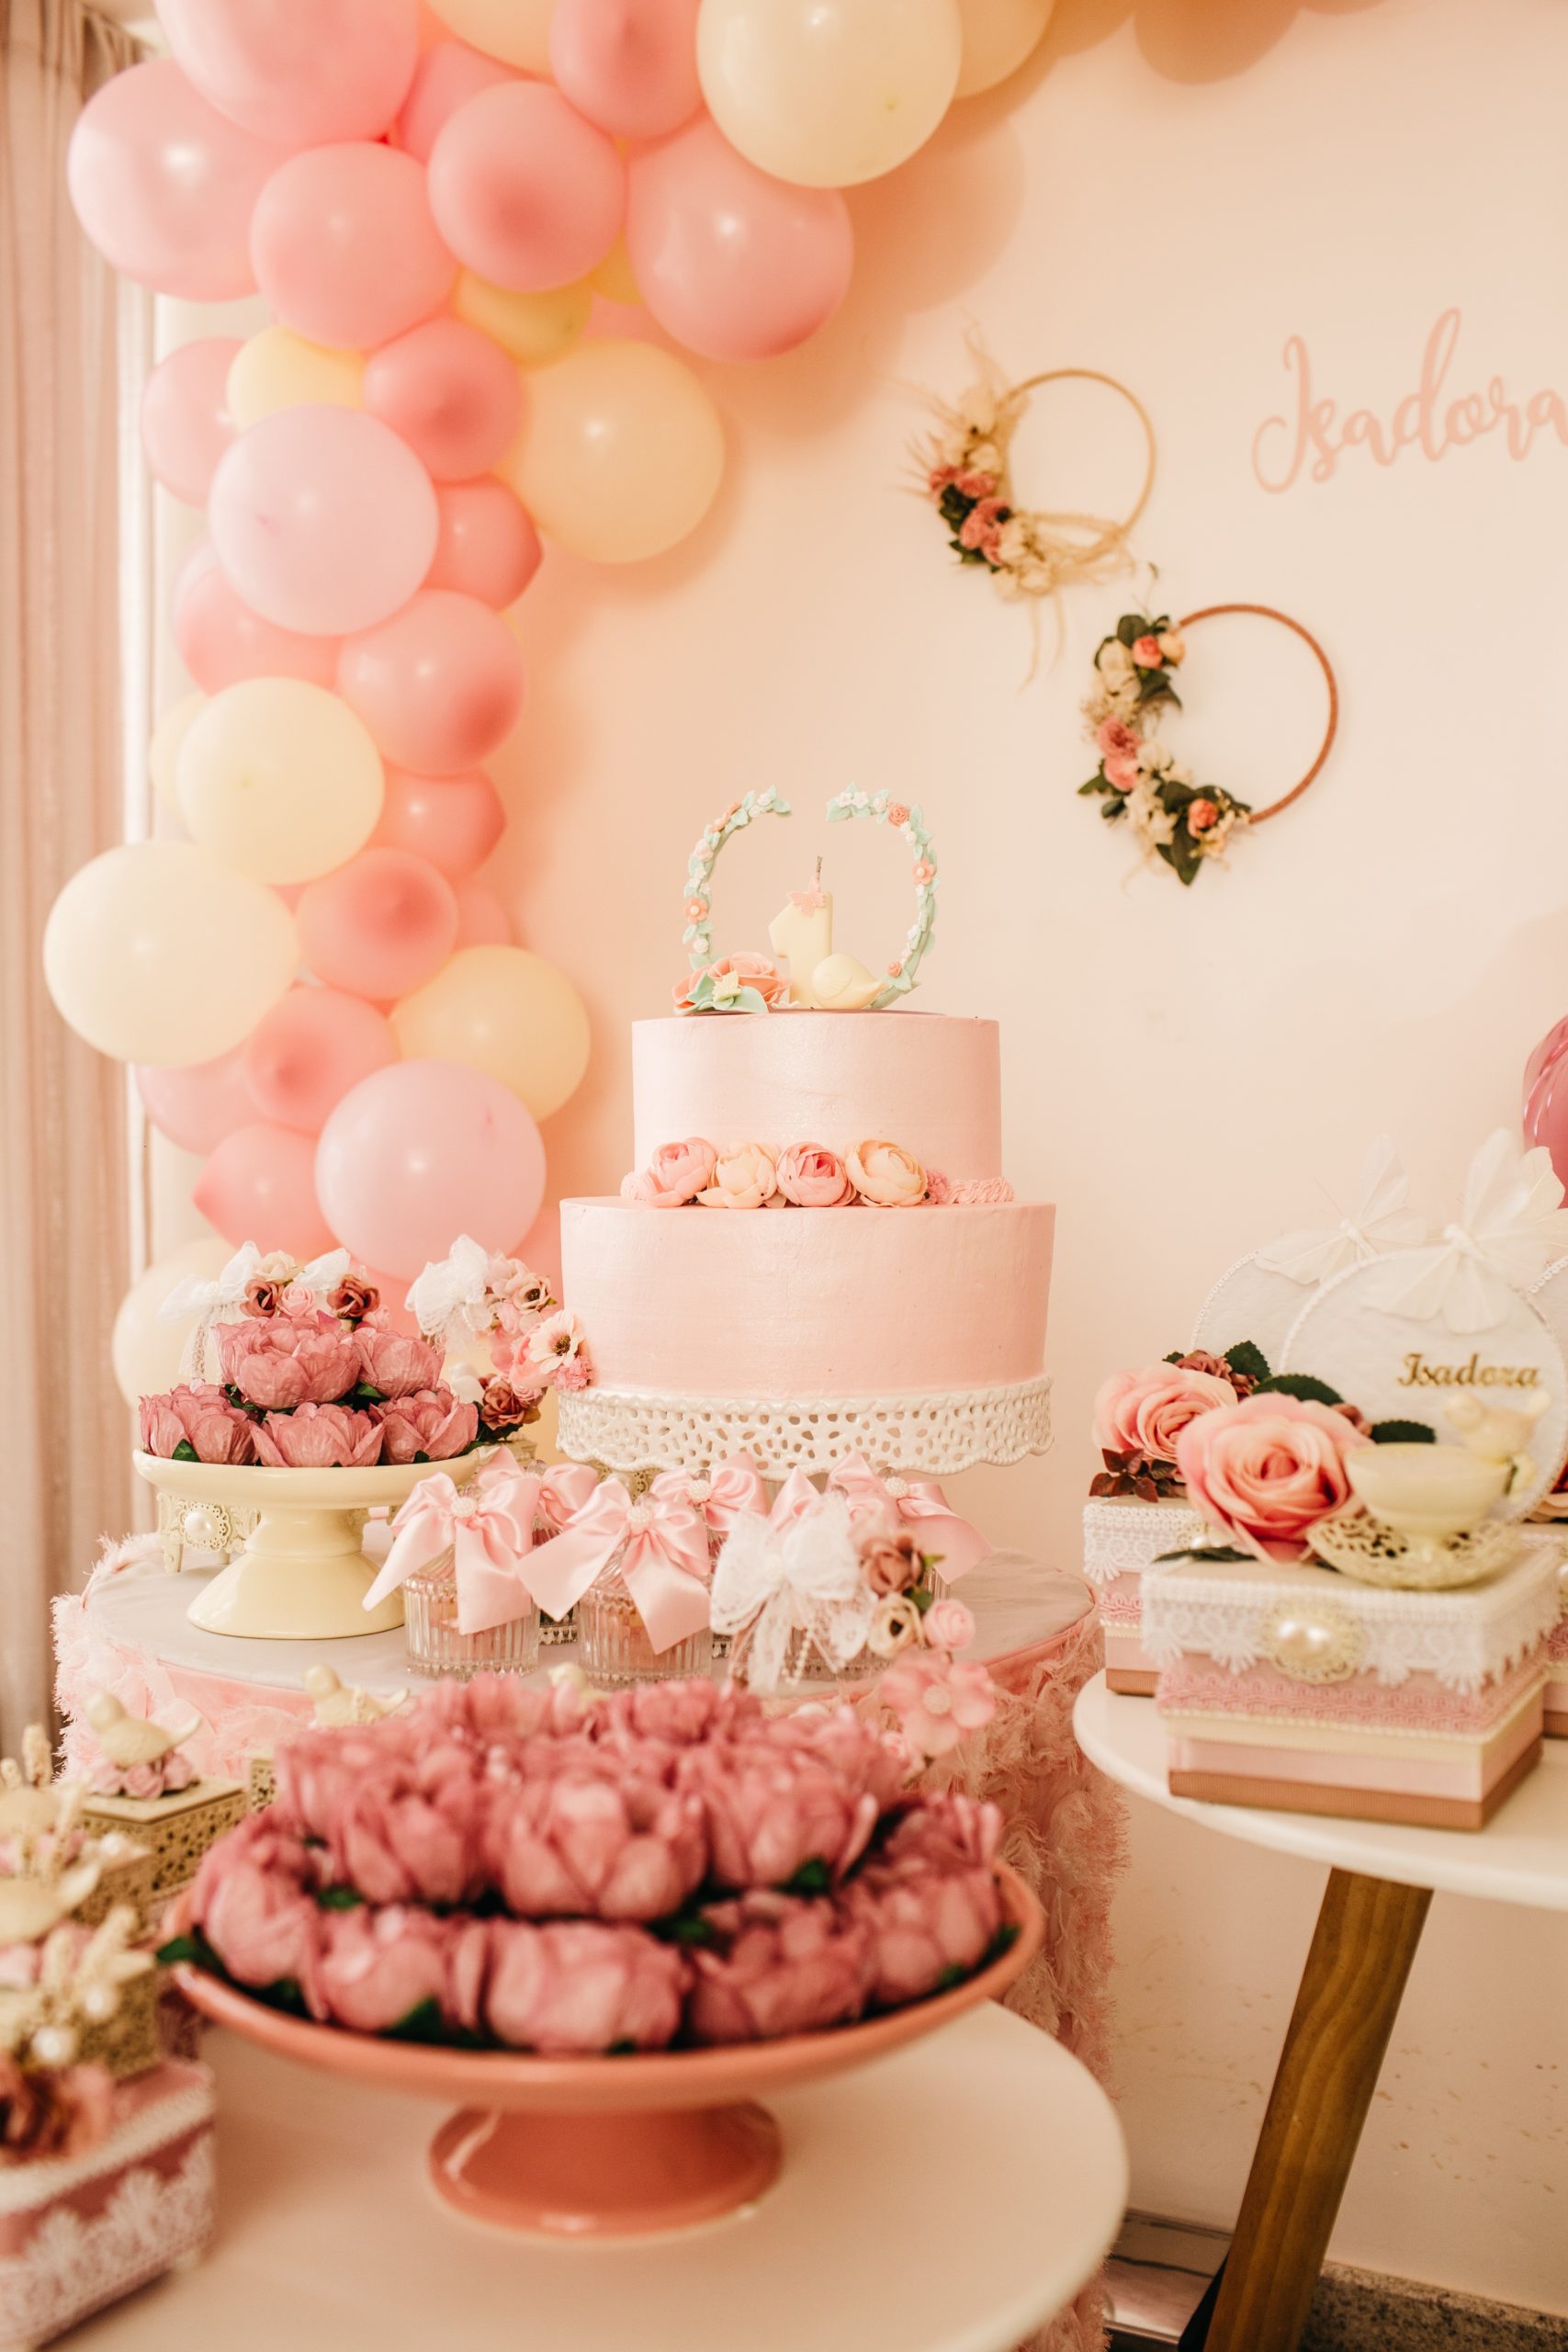 Pink-themed party with tasty and cute food on the table